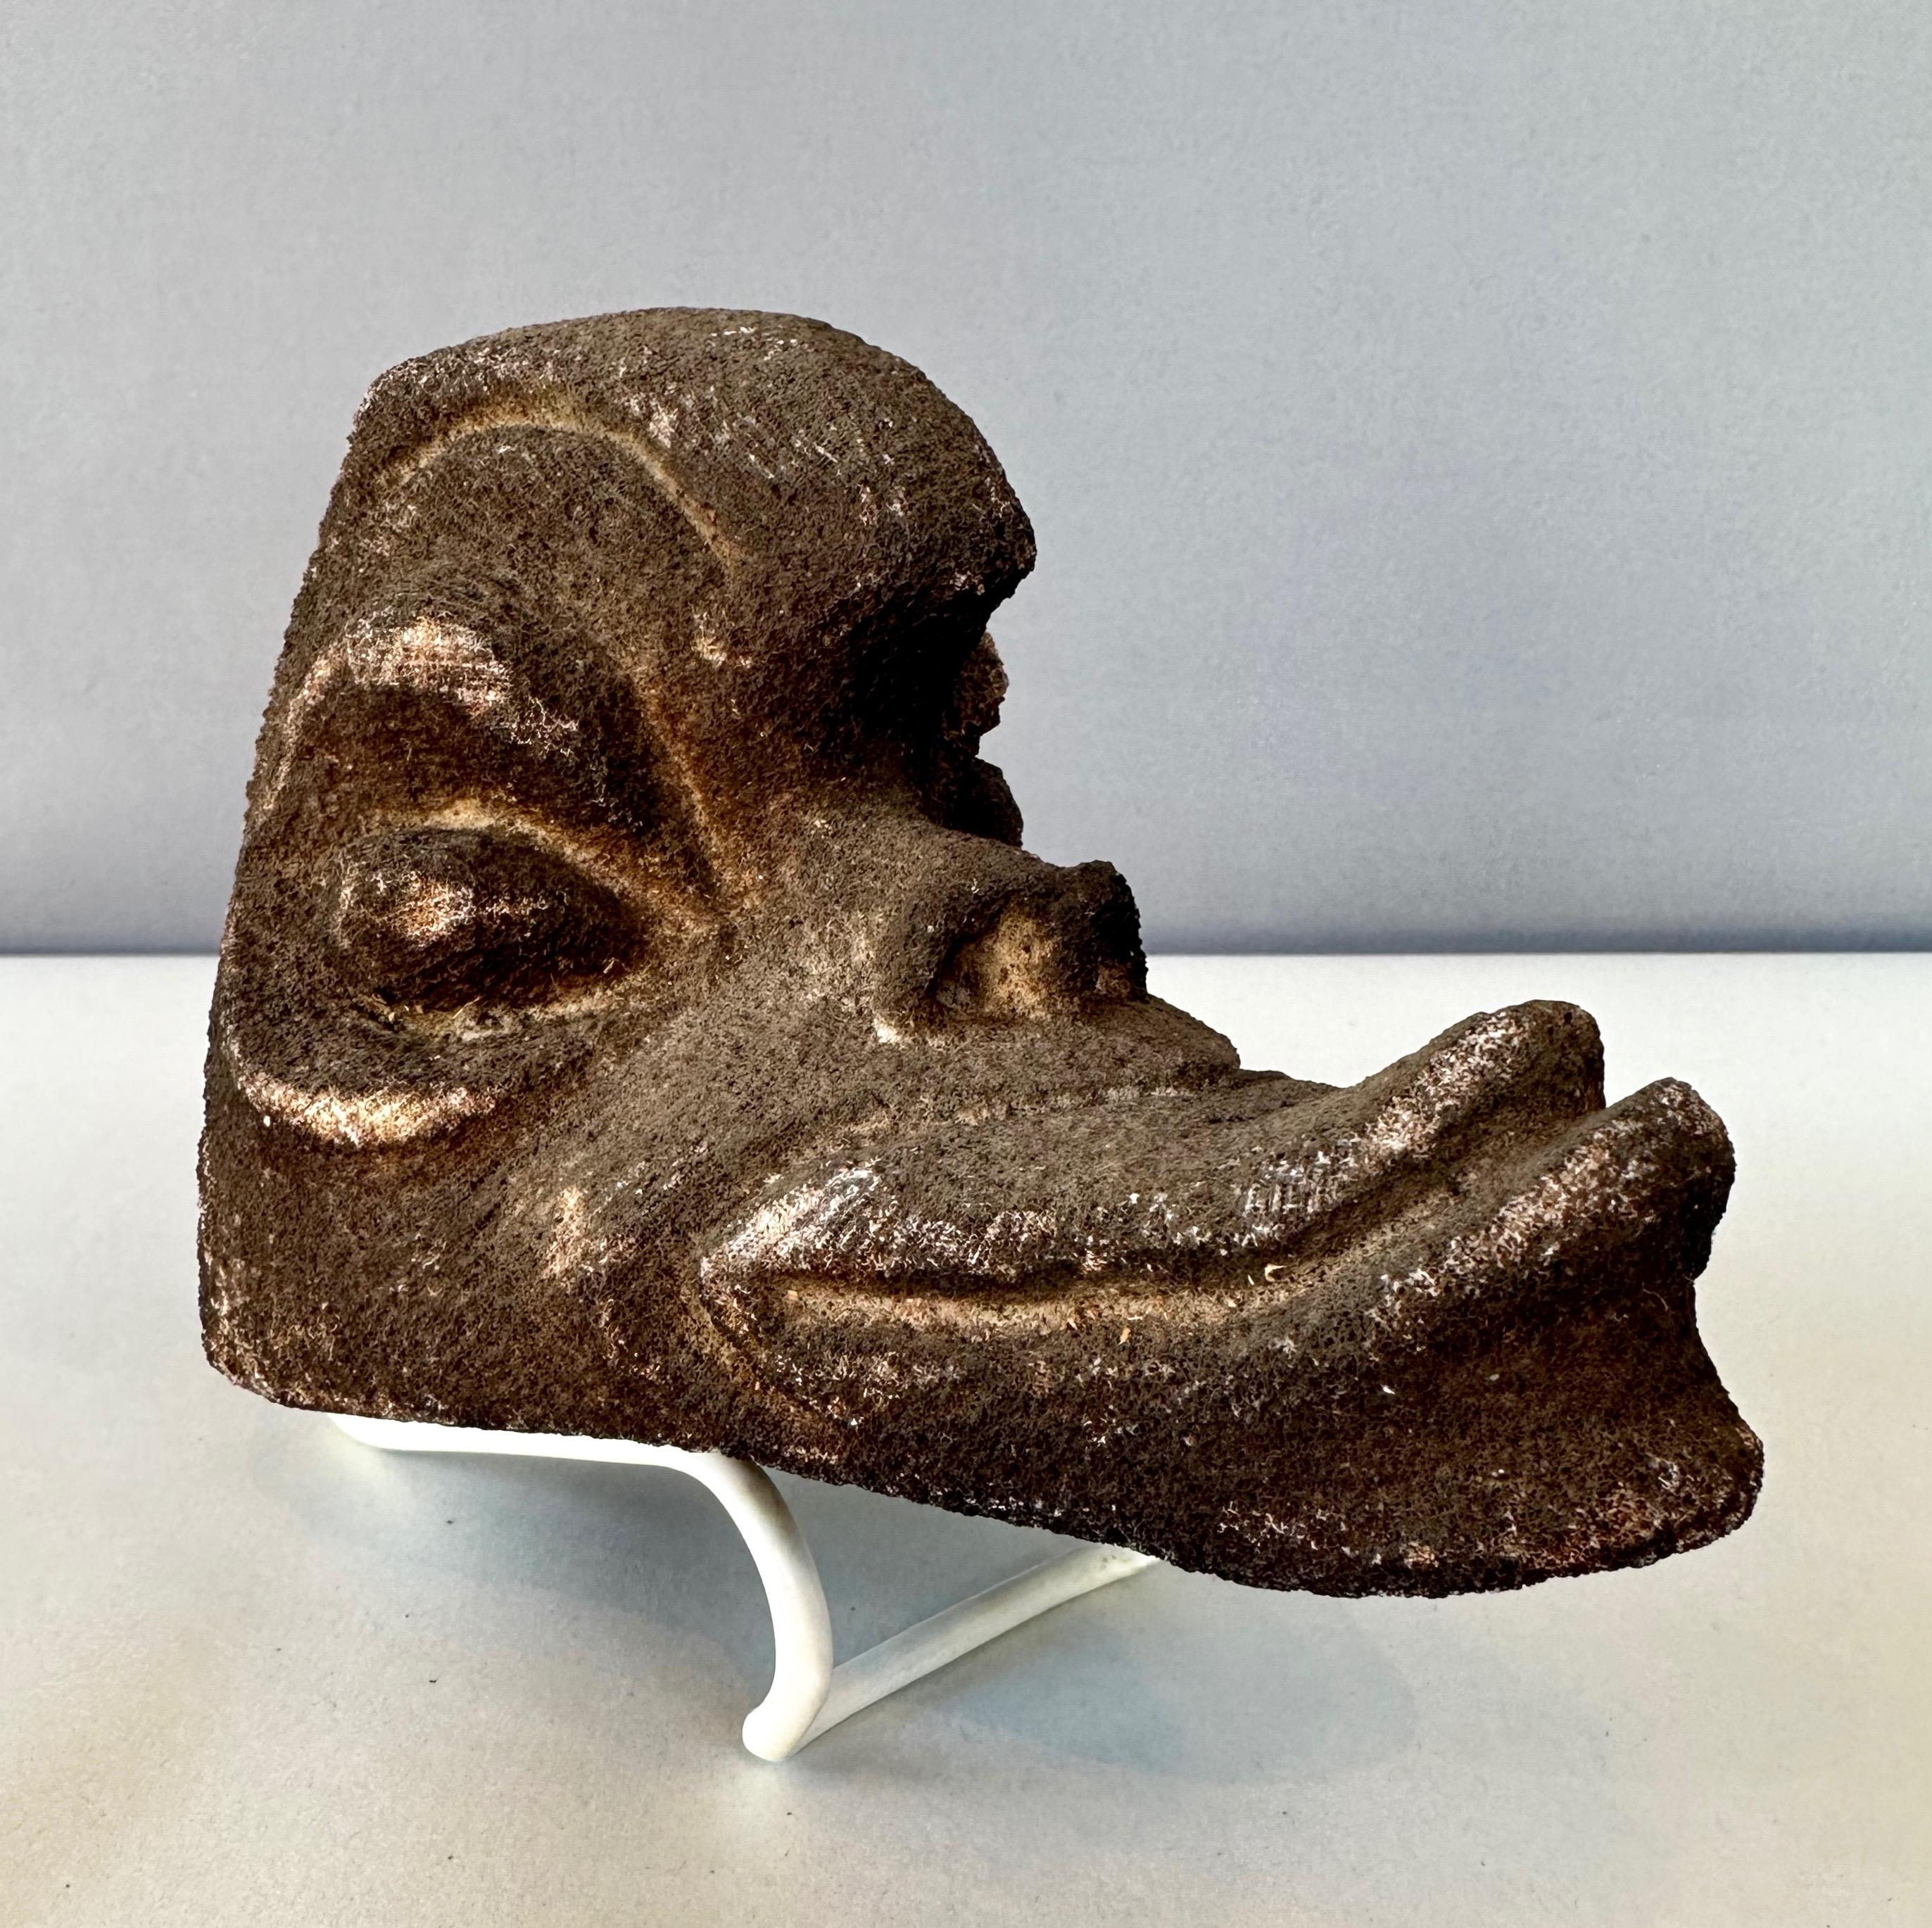 A rare Oceania Primitive carved coral ancestor’s head dating from the 1800s, if not significantly earlier.

Hand carved from a solid piece of white coral that’s been “blackened” via soot, soil, or stain that gives it a dark brown color, and at first